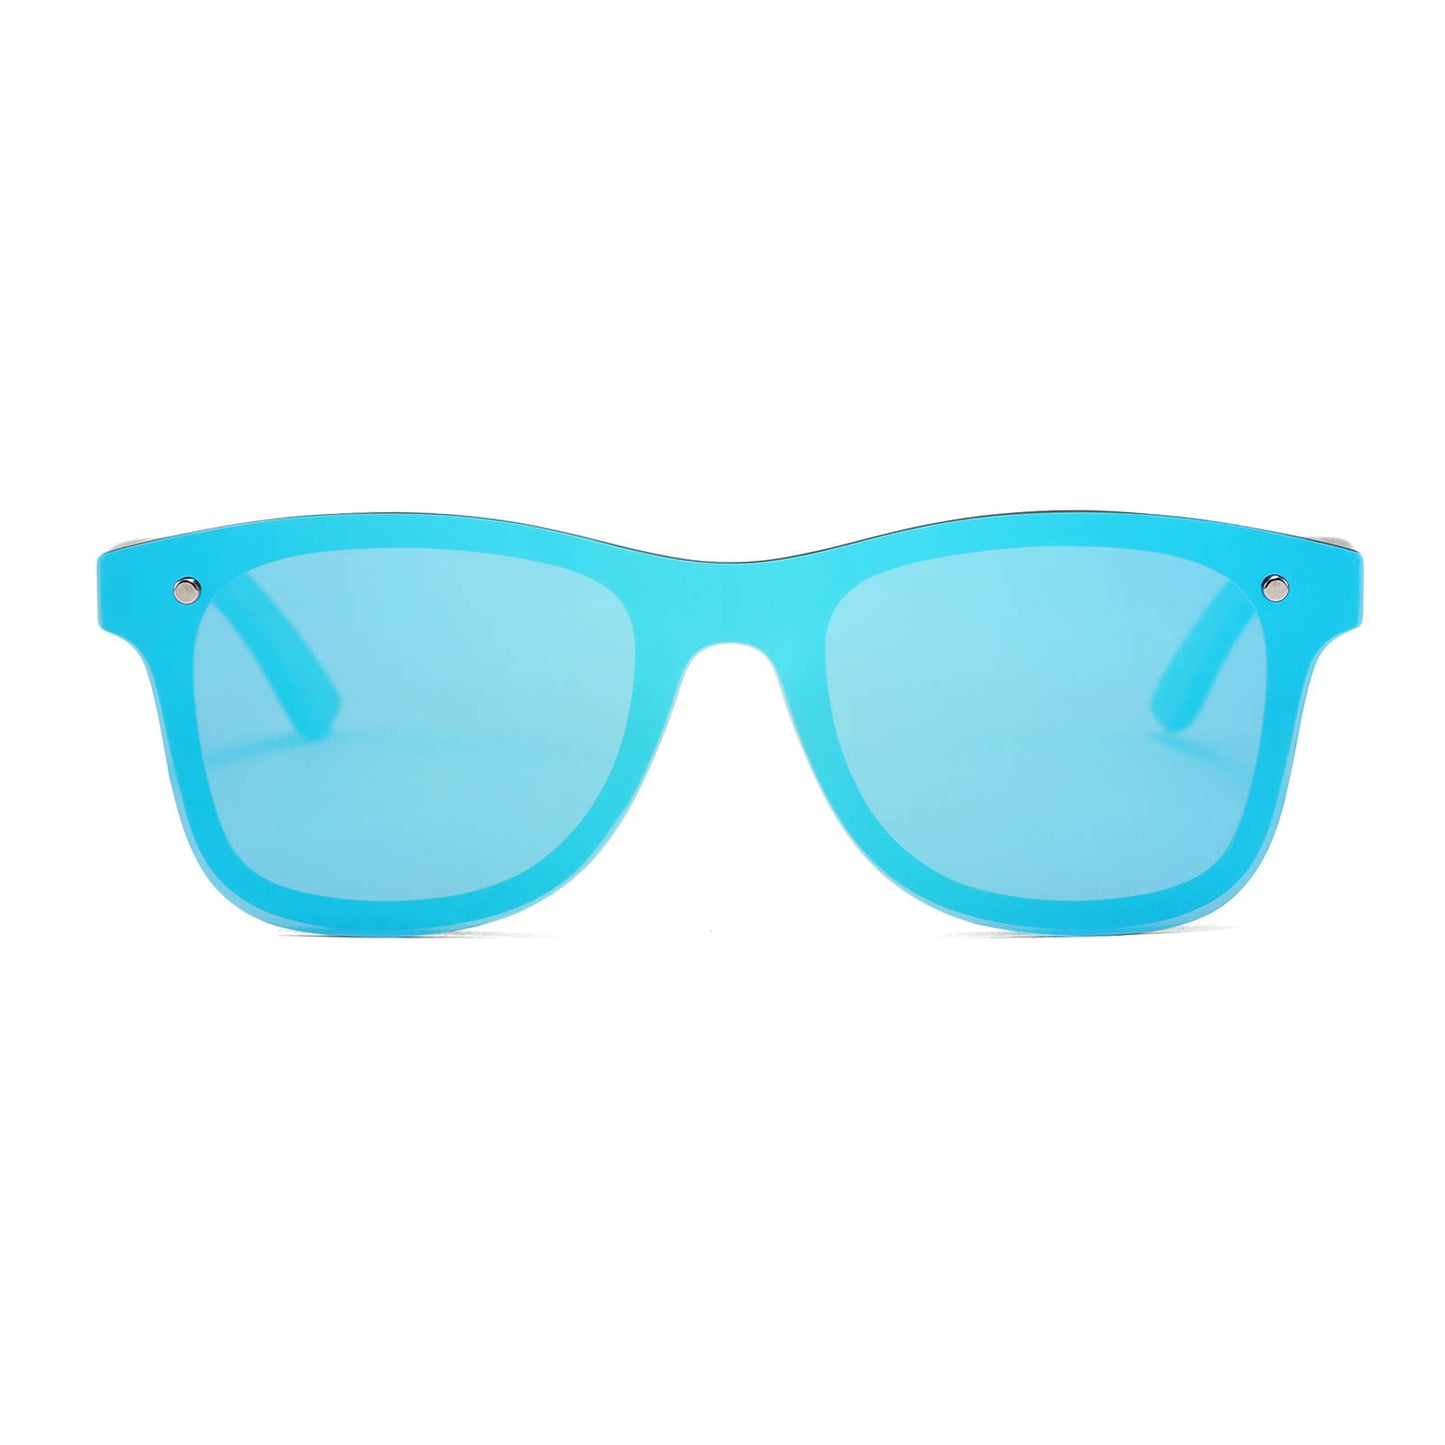 a pair of sunglasses with a blue lens